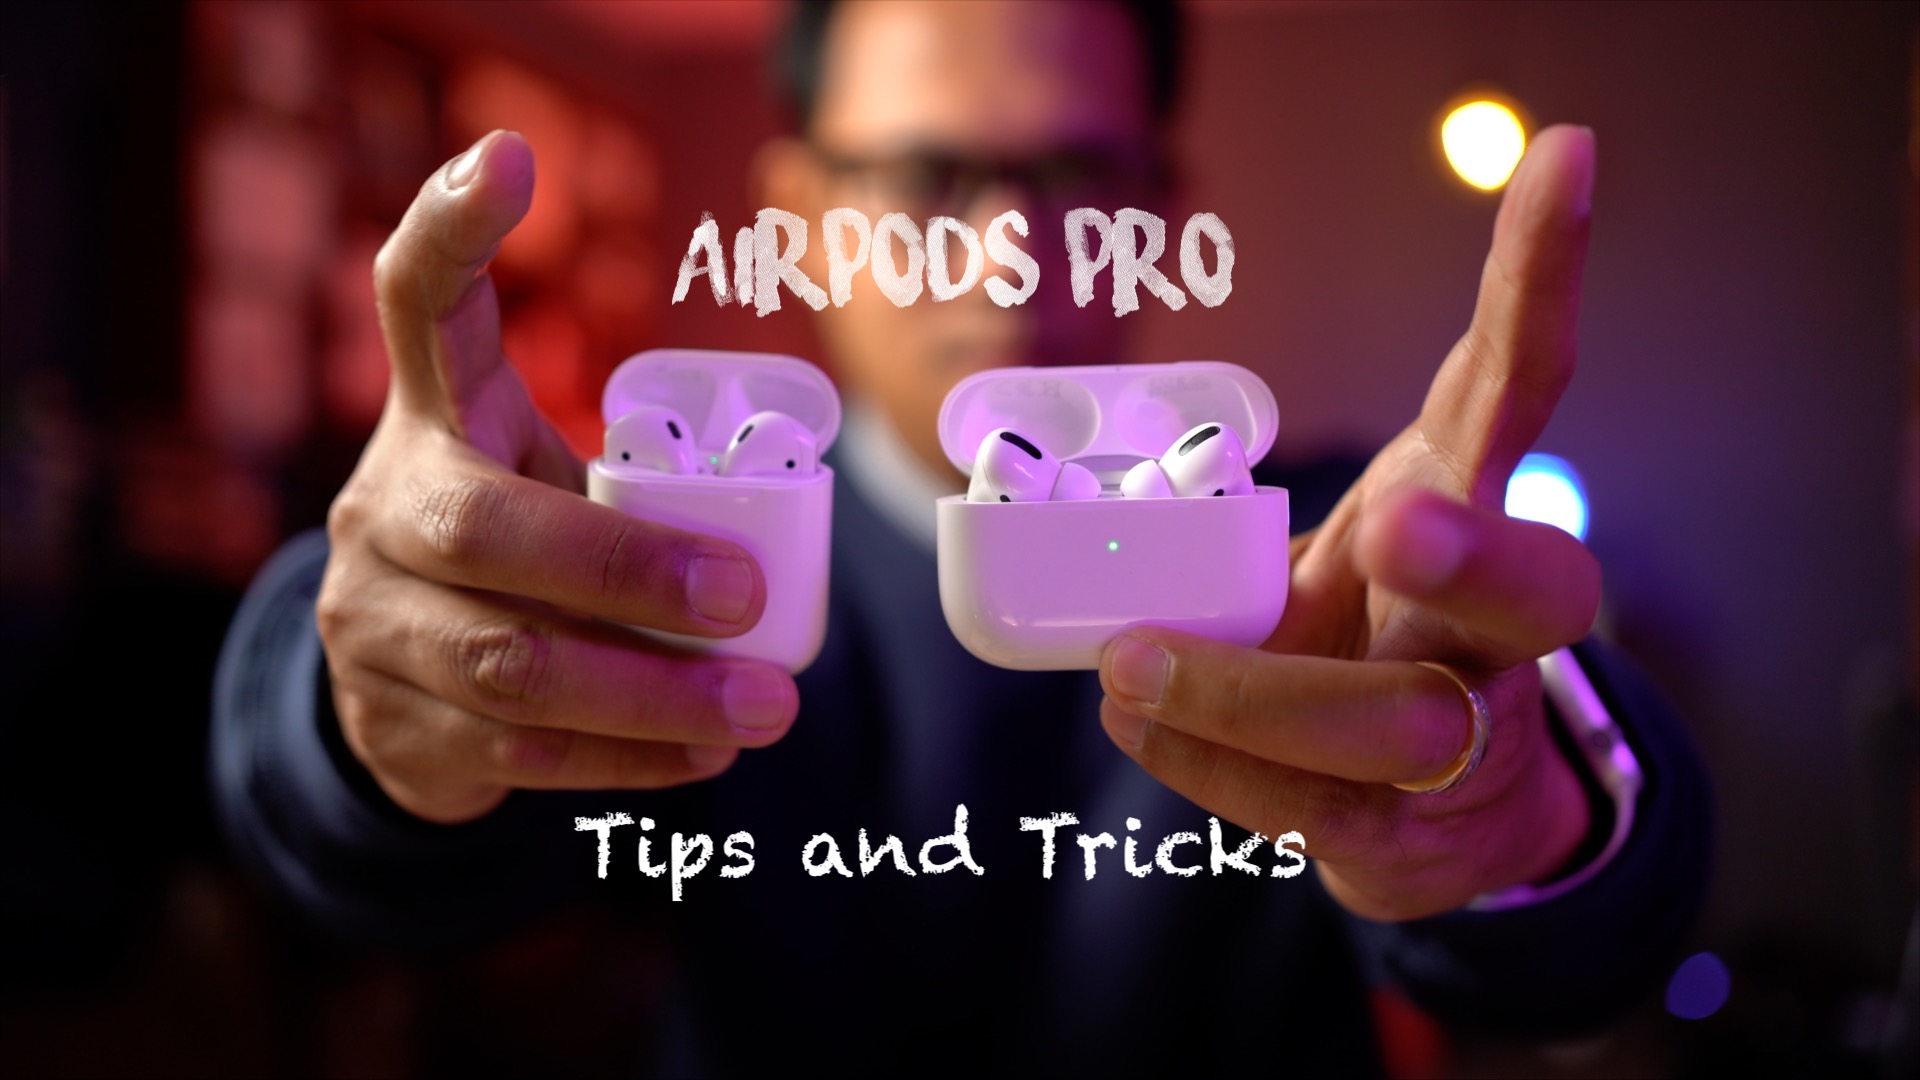 AirPods, AirPods Pro